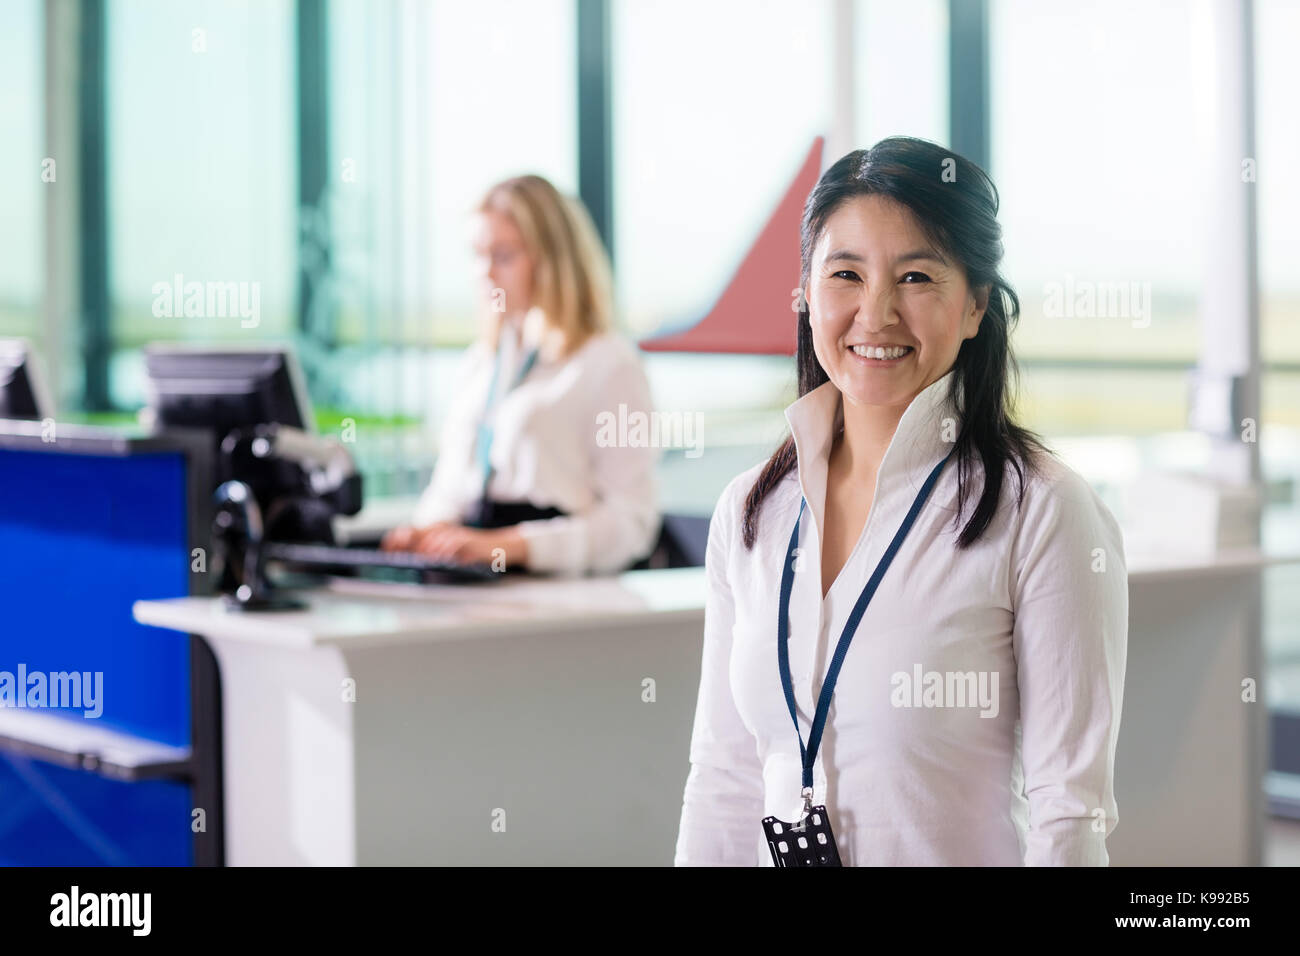 Ground Staff Smiling While Colleague Working At Airport Receptio Stock Photo